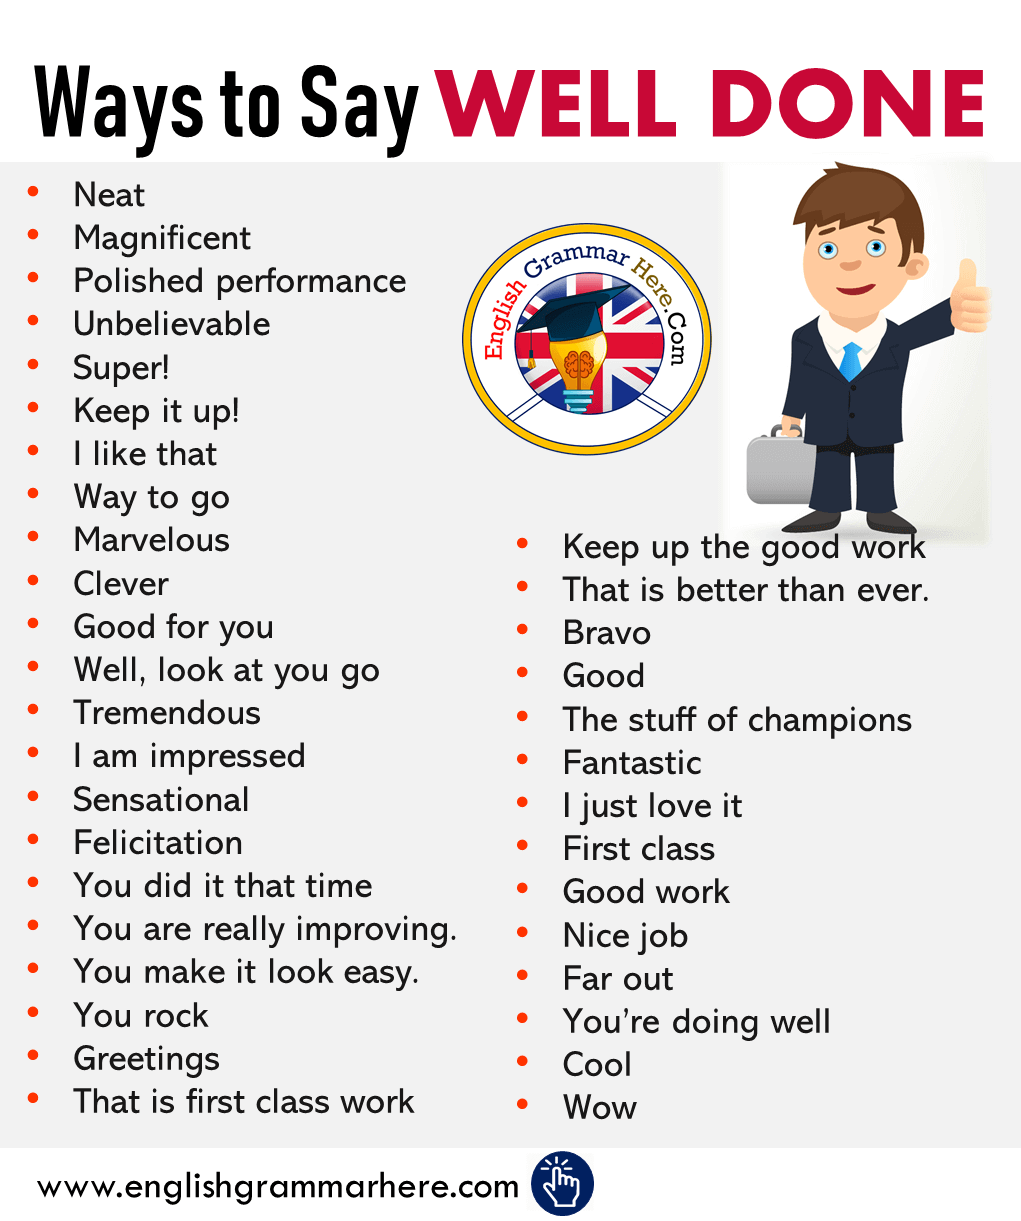 English Different Ways to Say WELL DONE